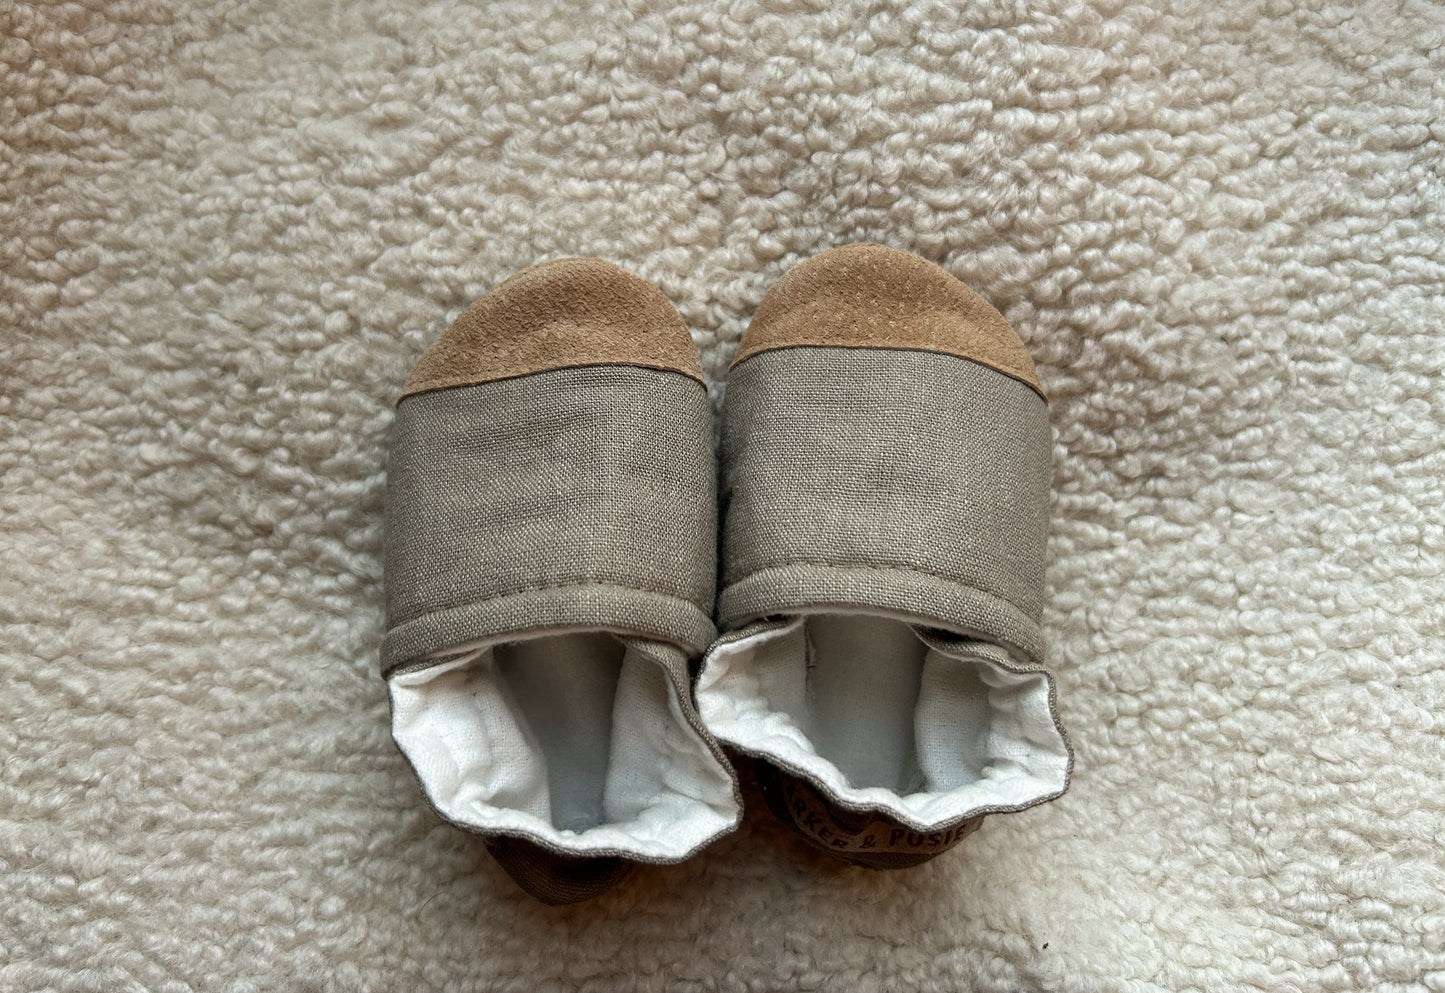 stone linen soft soled baby shoes